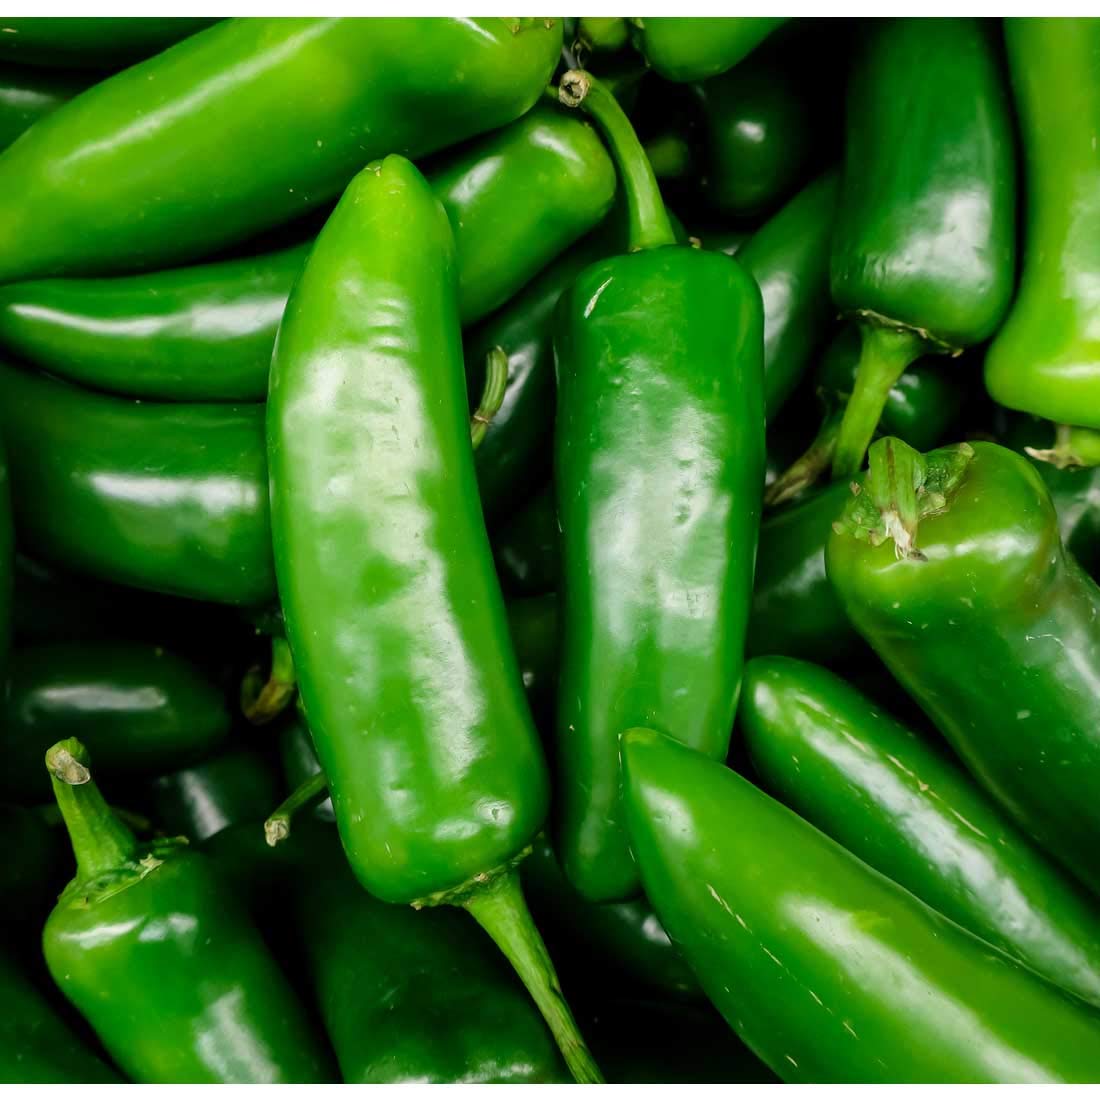 Pile of jalapeno peppers